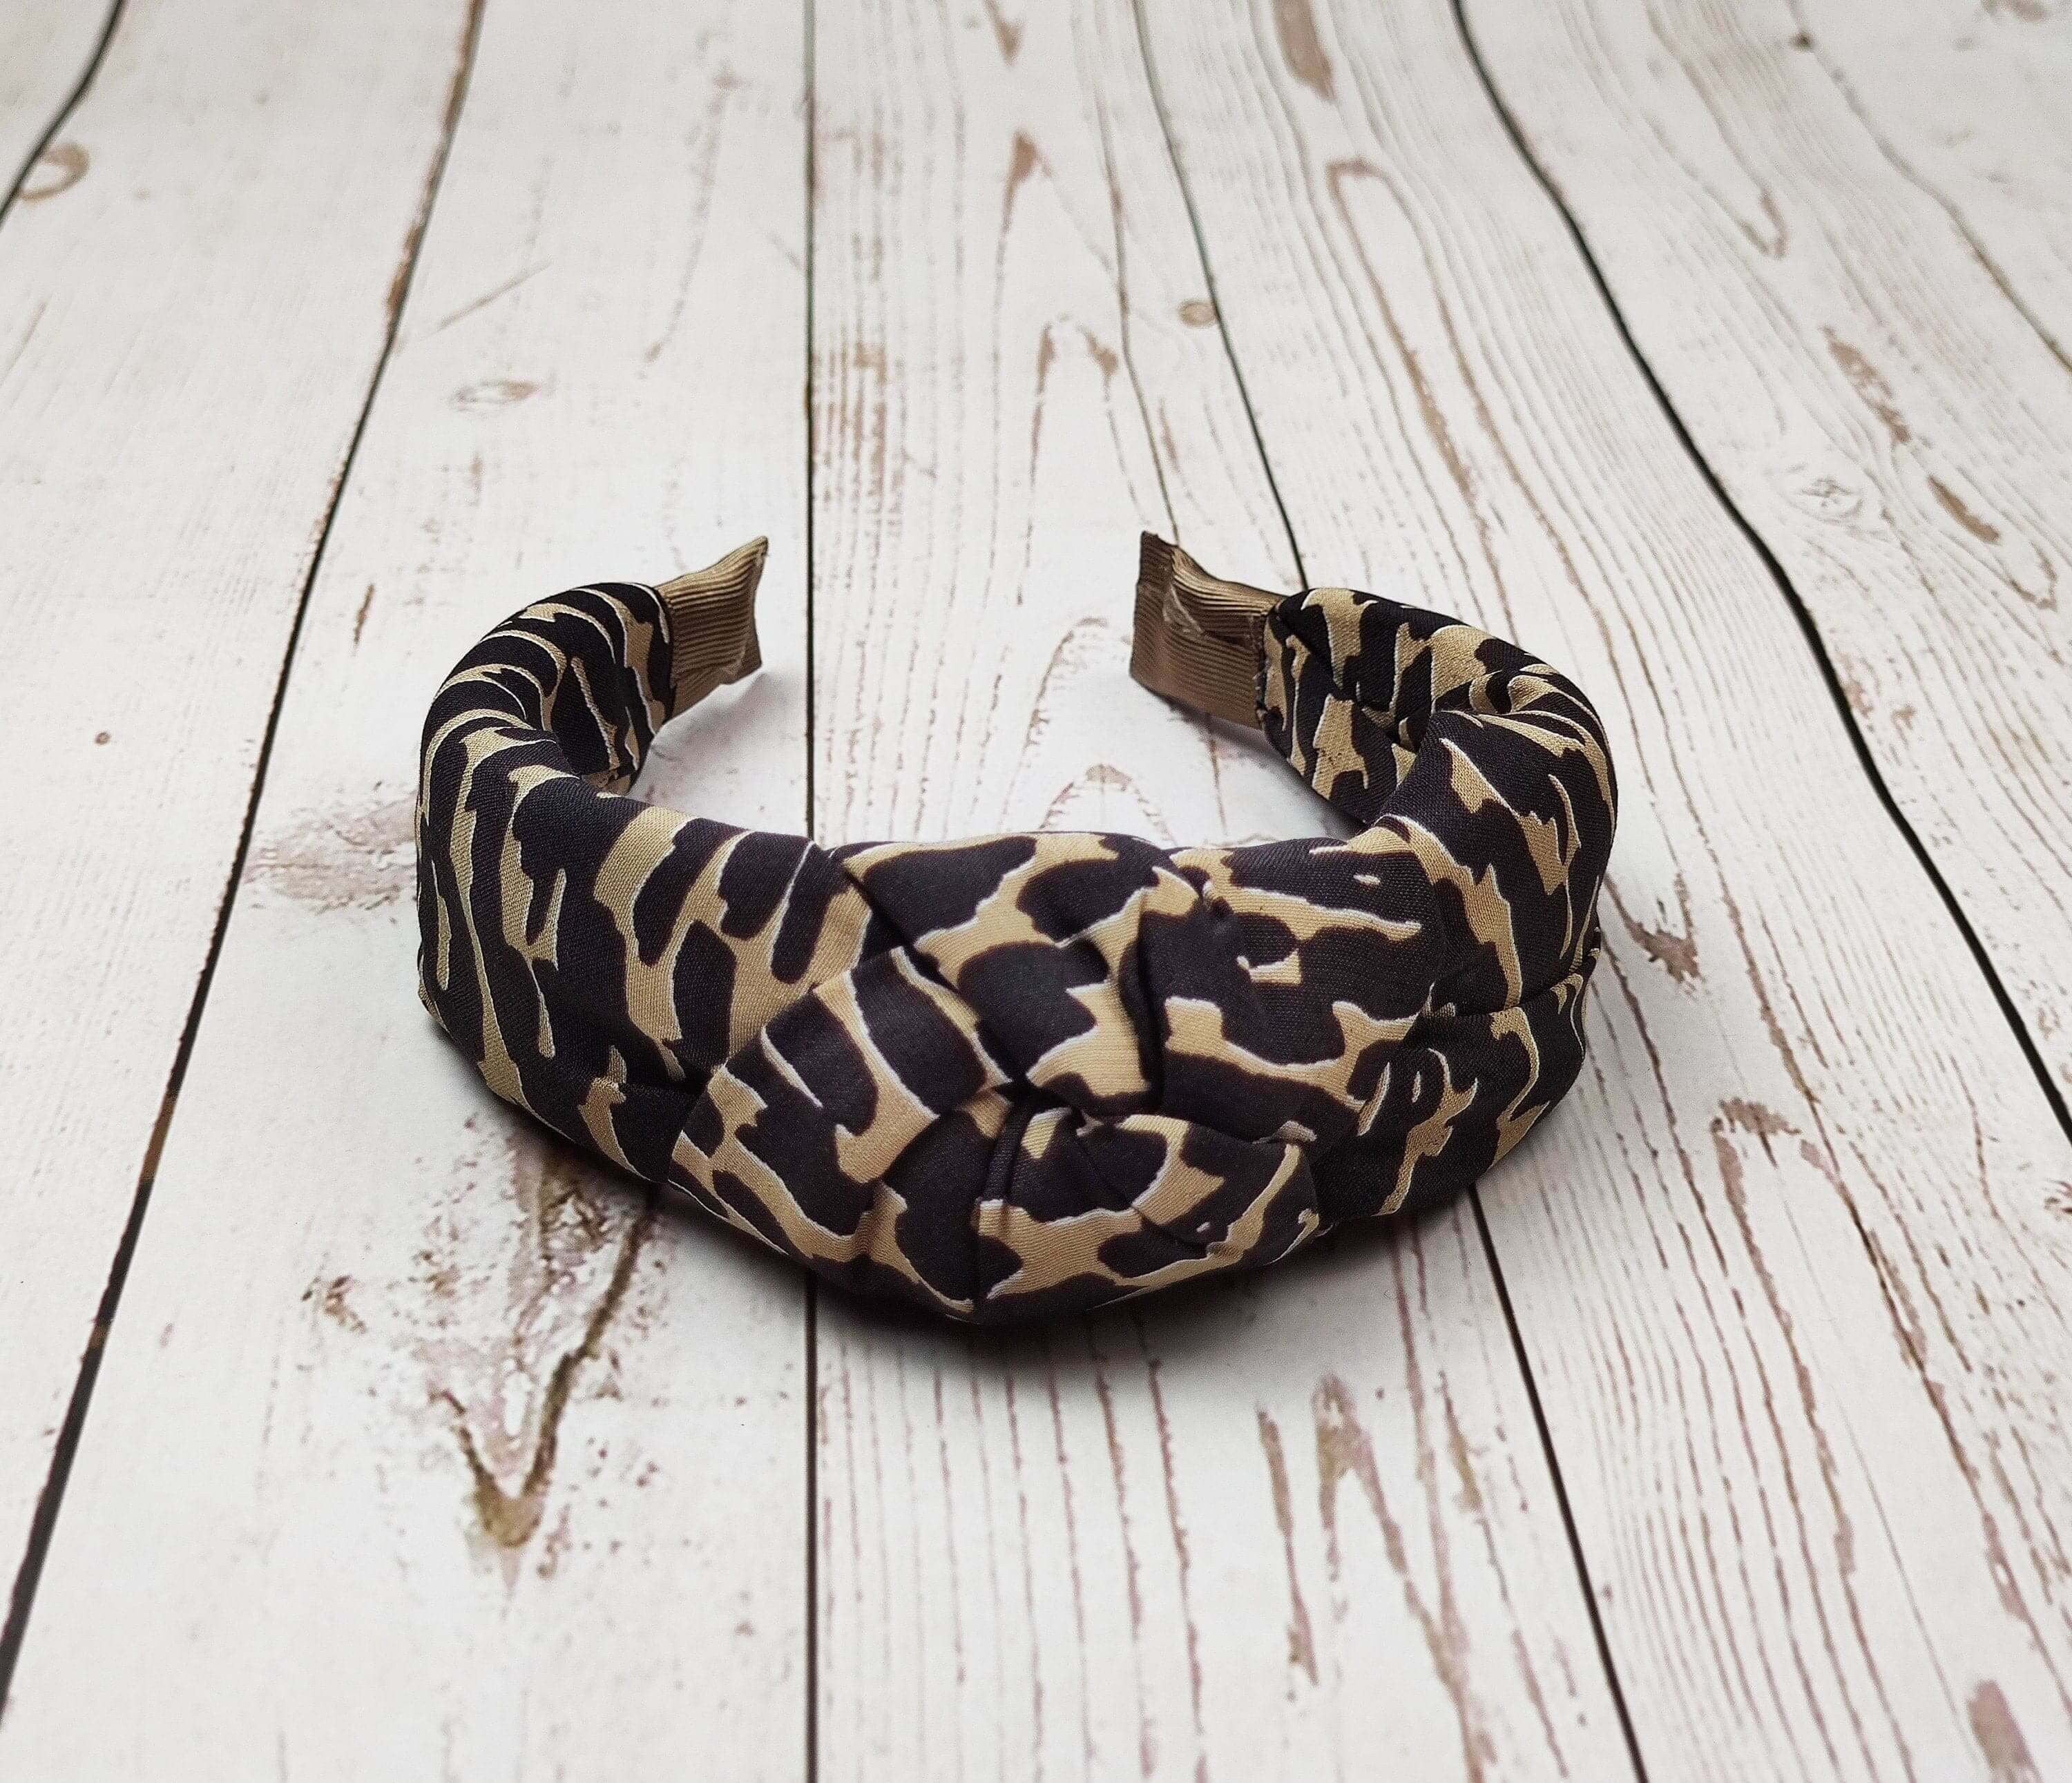 Stay comfortable and stylish with this black and brown leopard pattern headband, featuring a padded design for all-day wear.